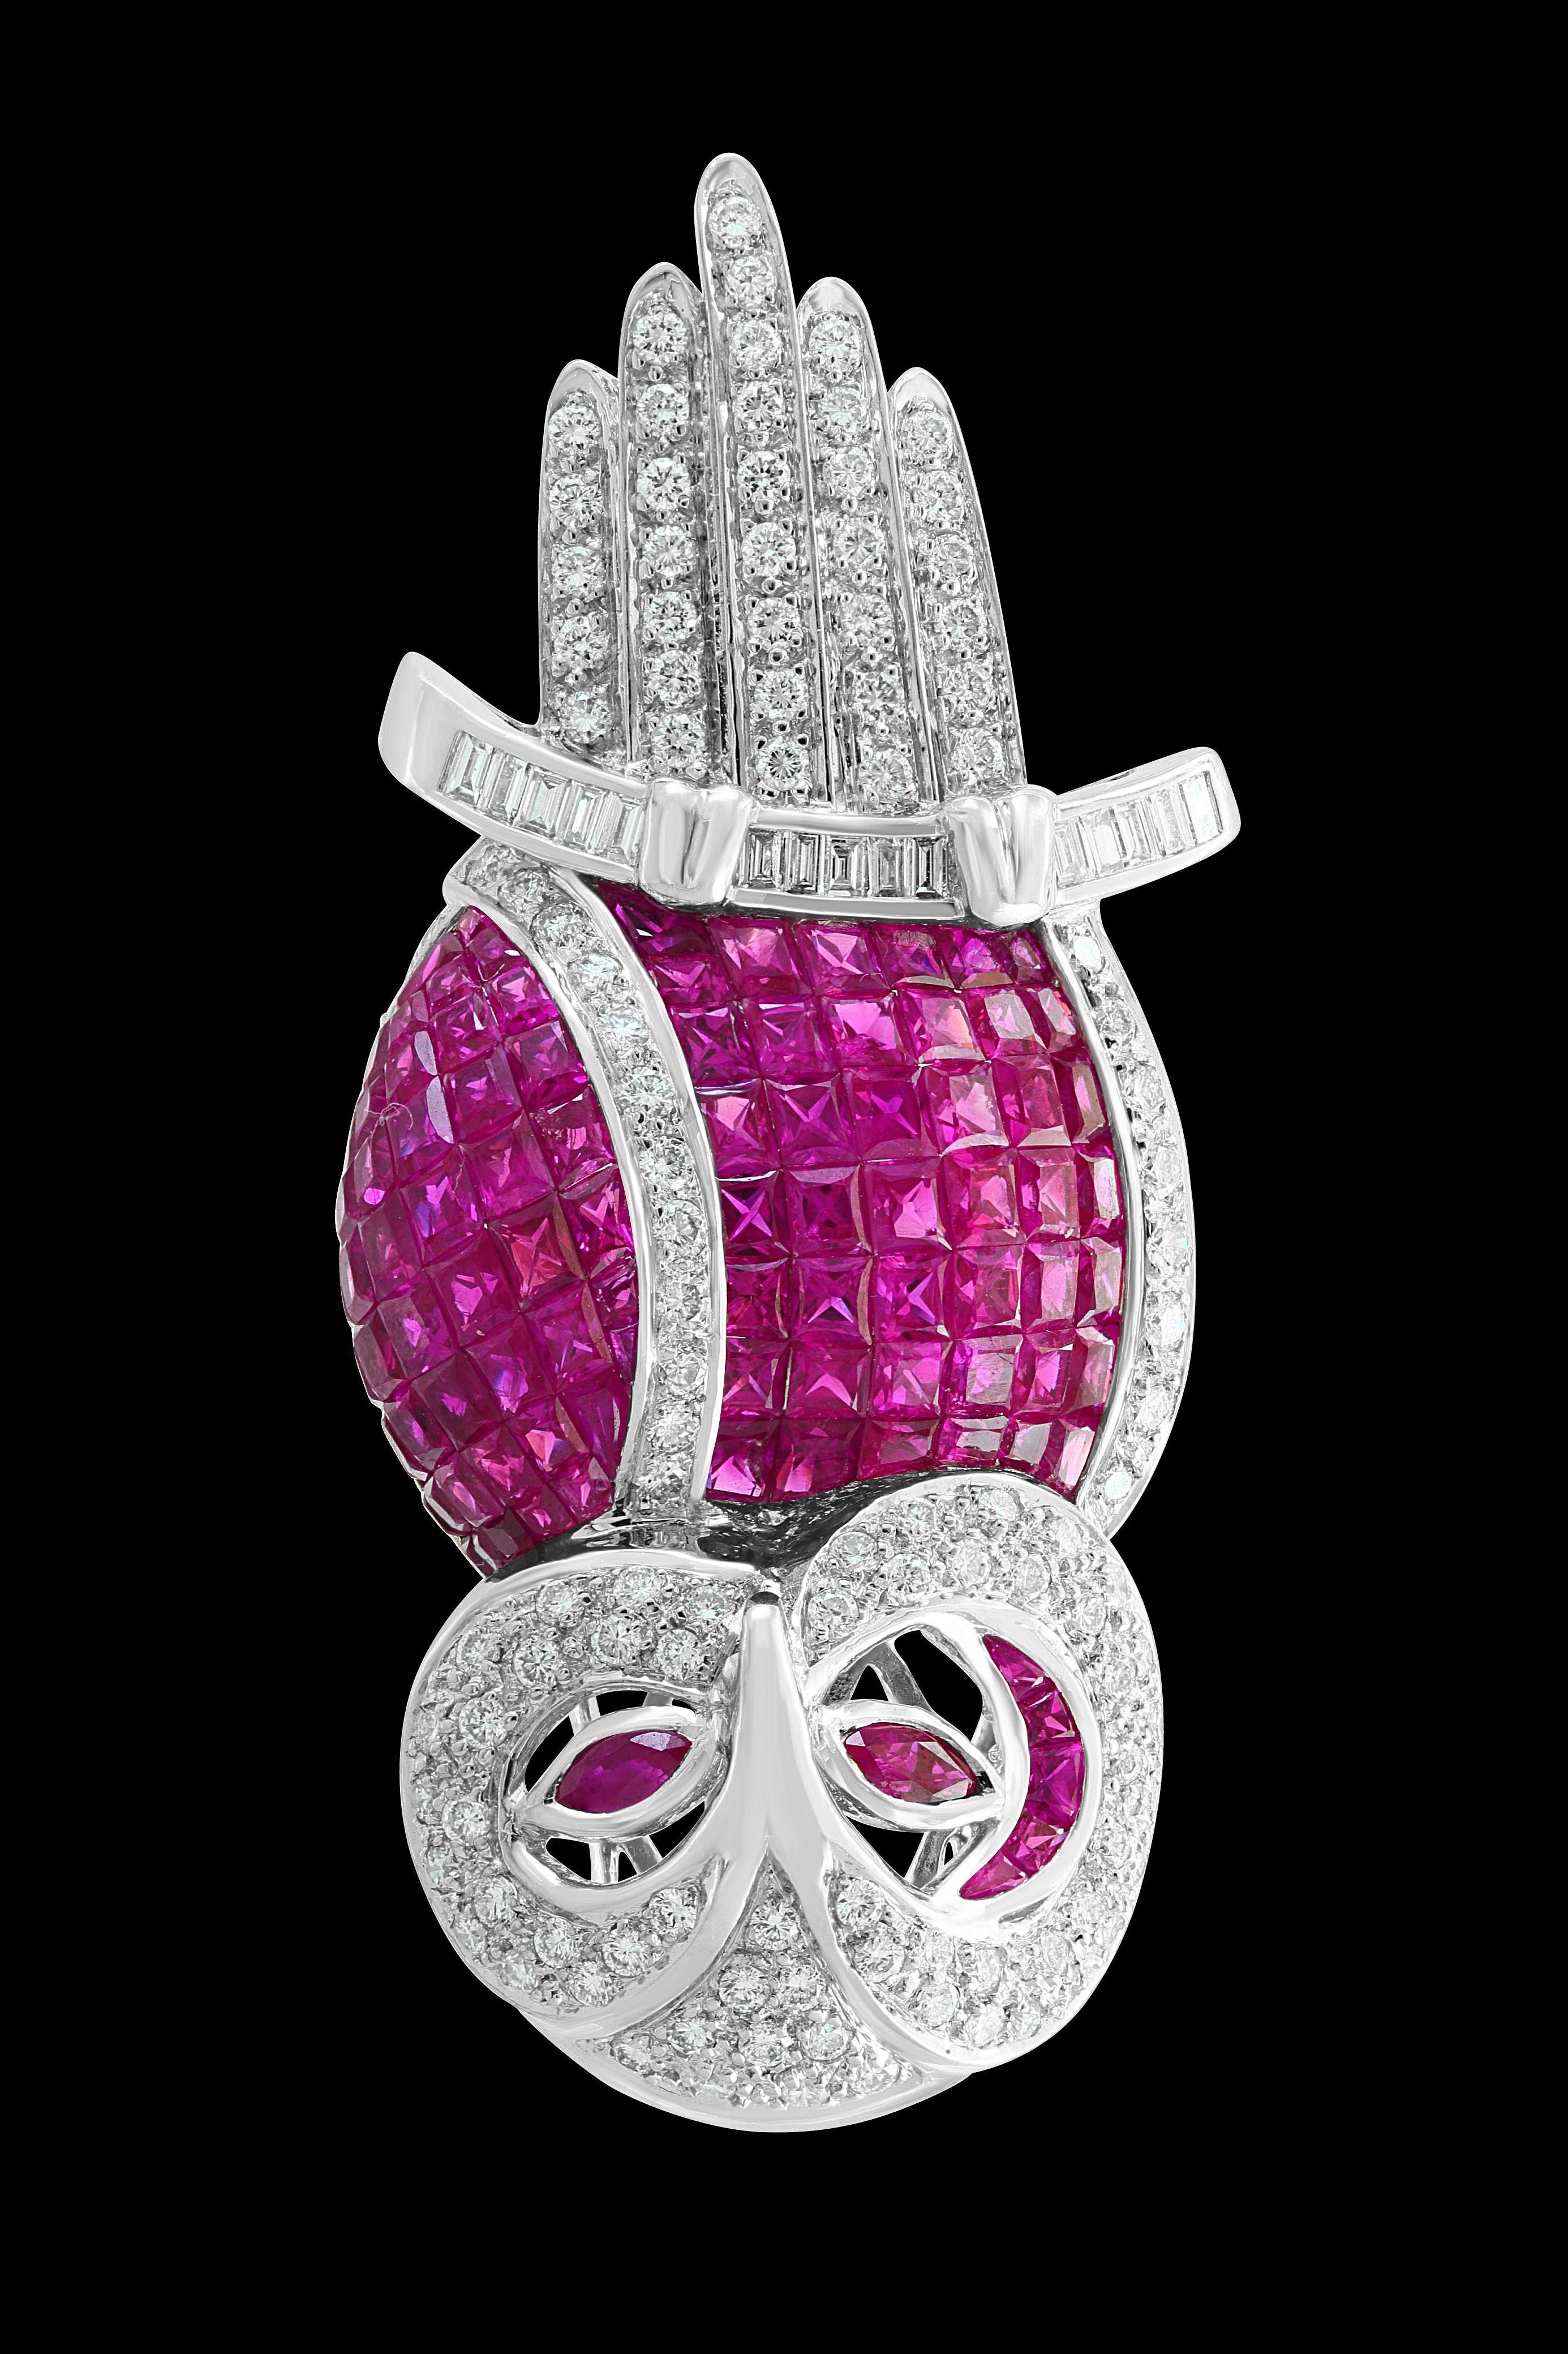 Invisible or Mystery set  Princess cut  Burma Ruby  And  Diamond  Owl Pin/ Pendant  in 18 K  White Gold .
18 K gold 24 Grams
 Diamonds: approximate 6.5 carat , VS Quality G color
 Ruby  natural  : approximately 10.5 Ct .
Origin : Burma
This owl pin